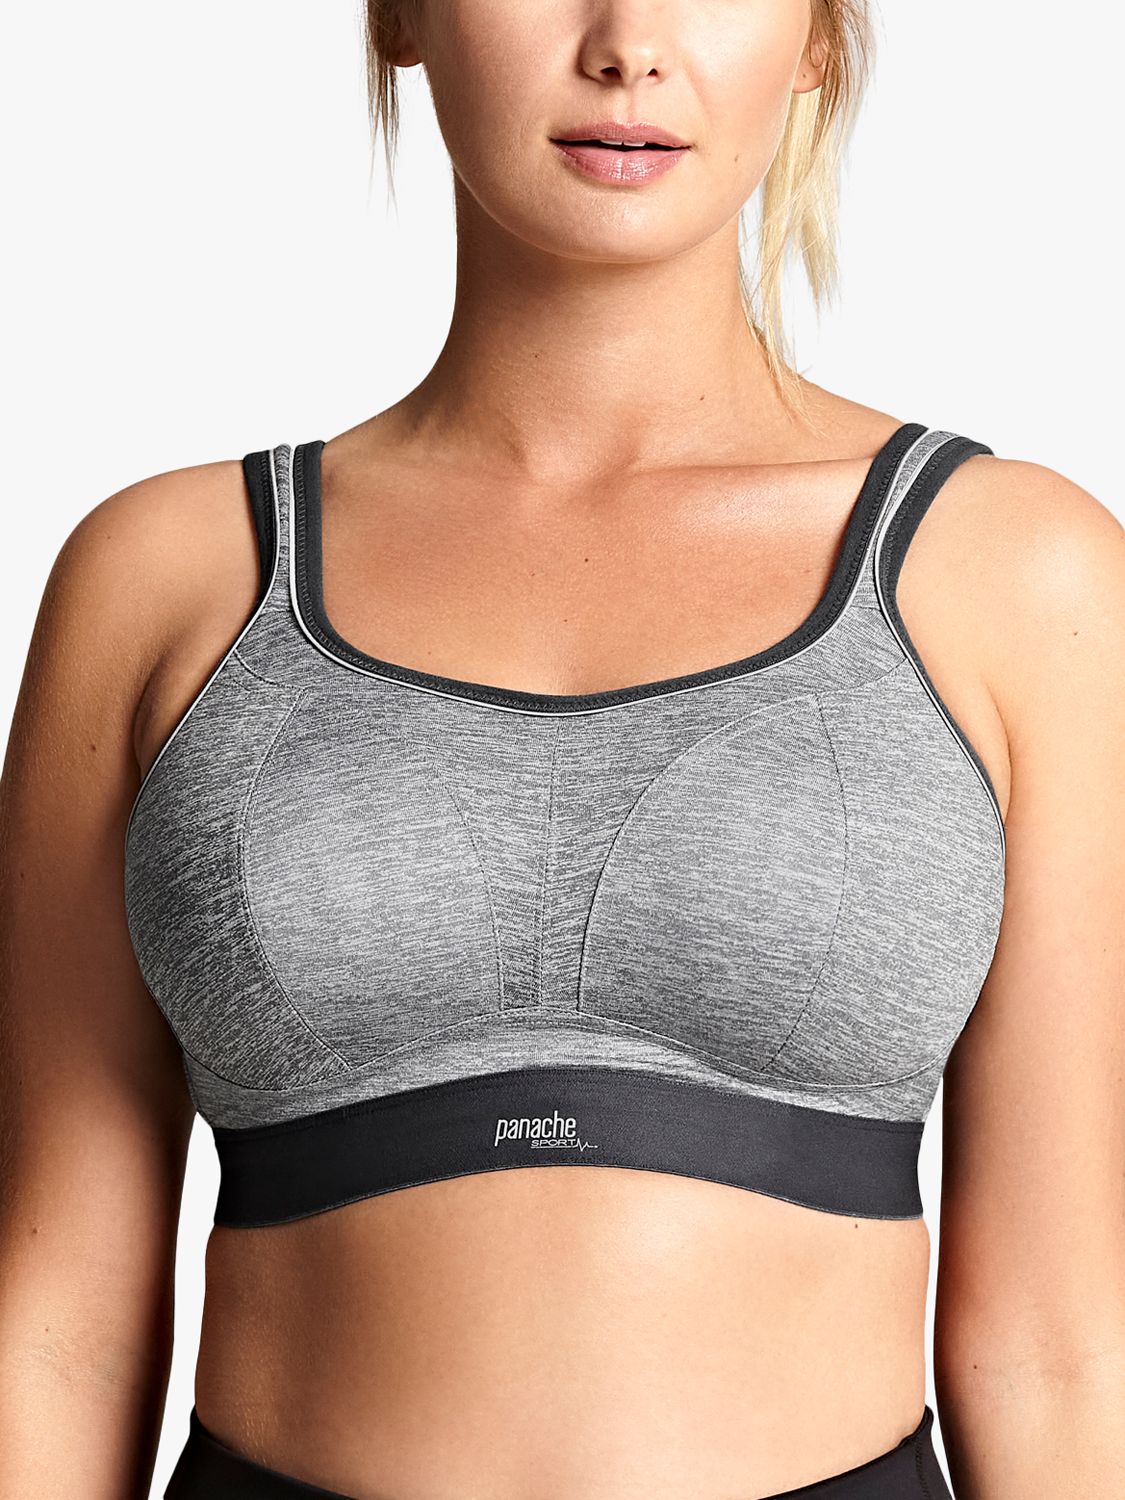 PANACHE sports bra  For ultimate non-wired support